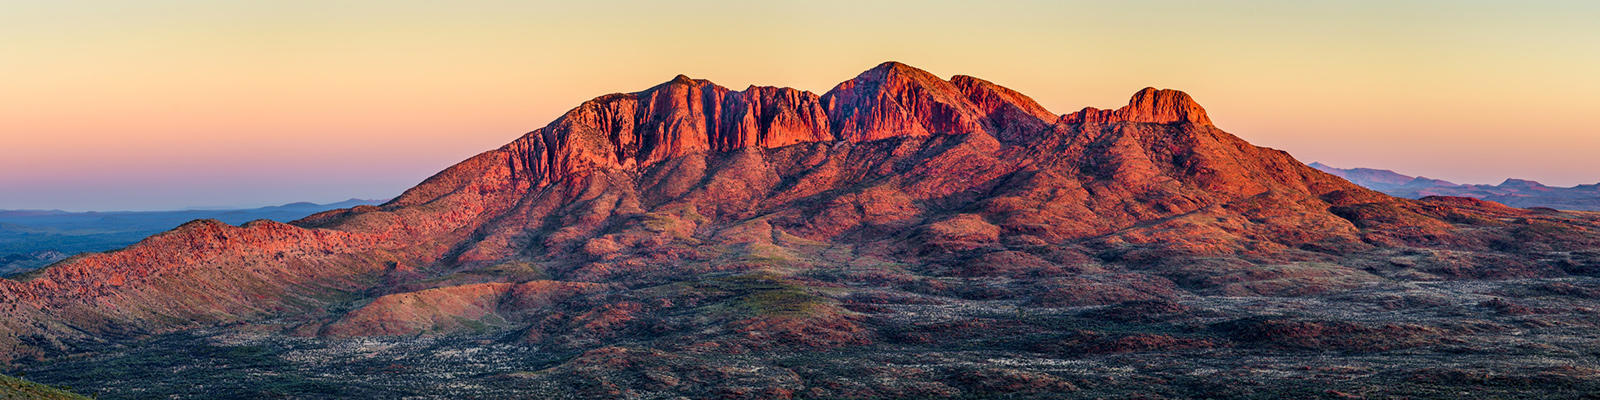 northern territory landscape